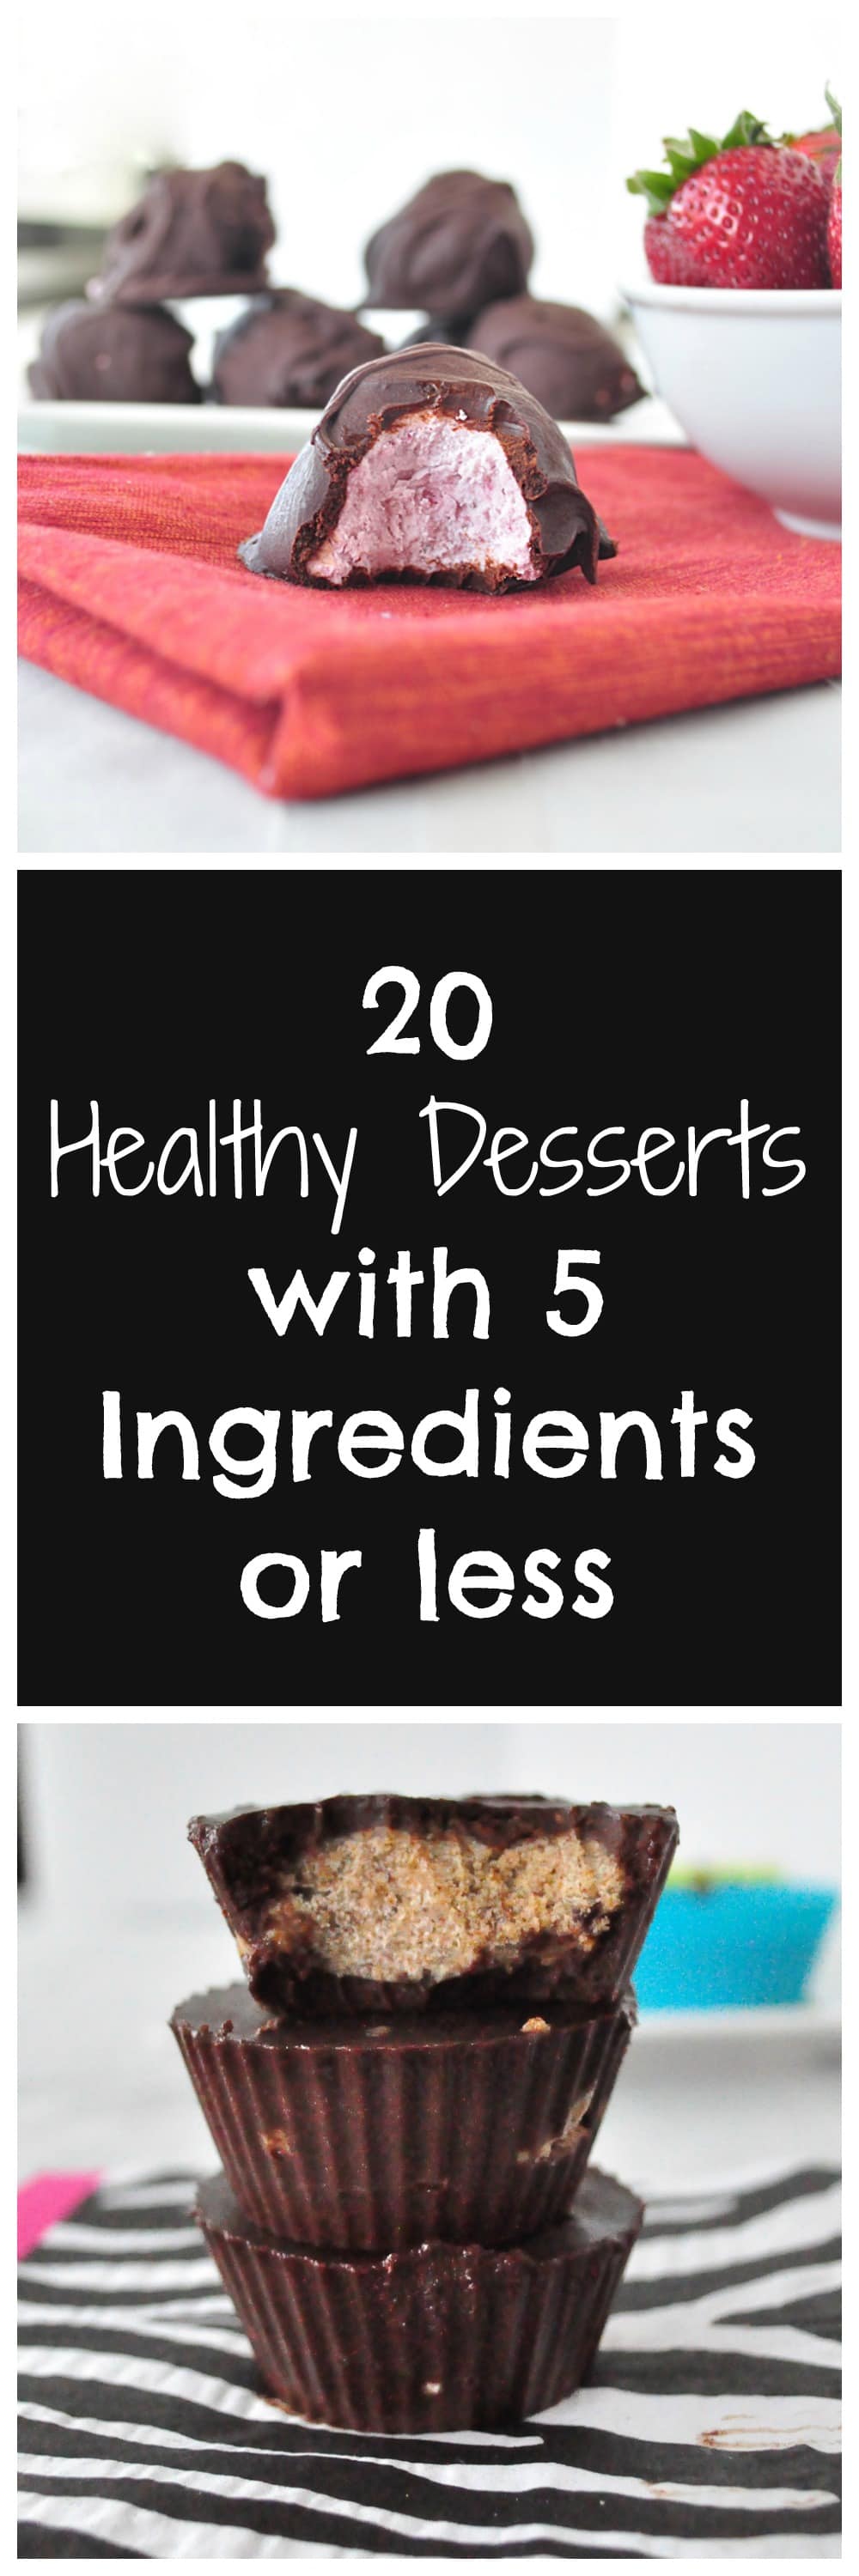 20 Healthy Dessert Recipes with 5 Ingredients or Less My